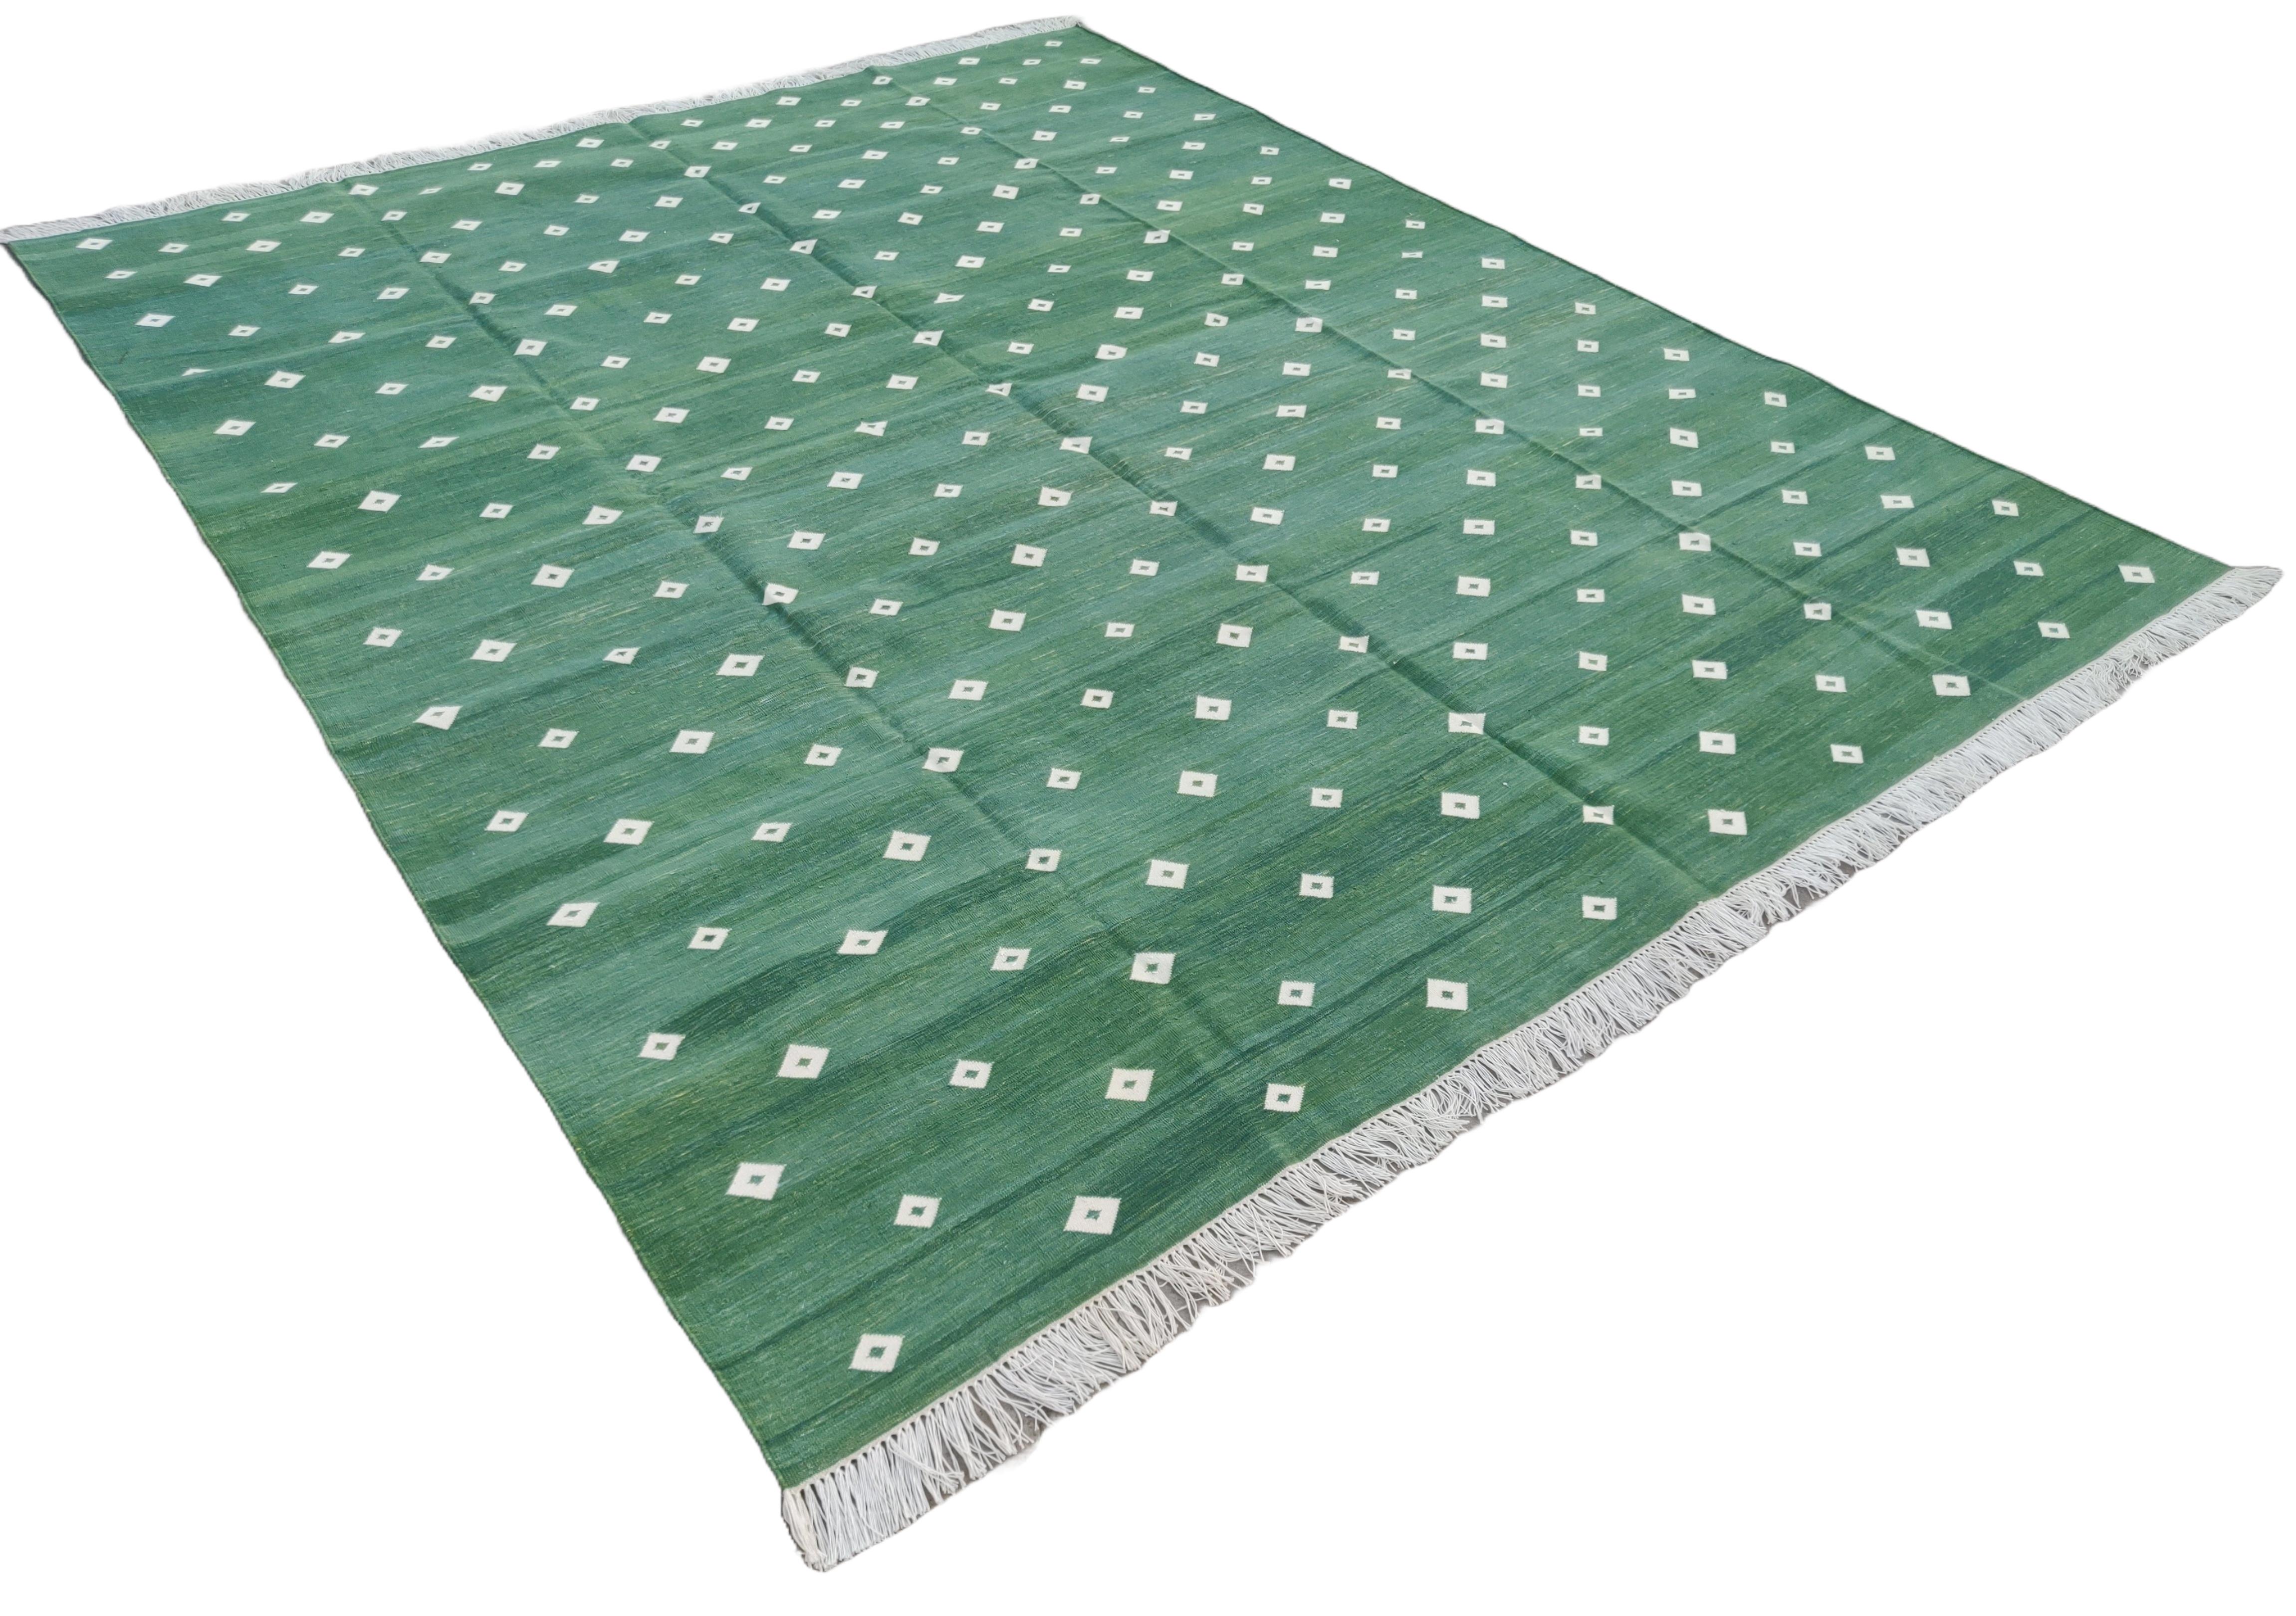 Handmade Cotton Natural Vegetable Dyed Rug, Forest Green And White Diamond Indian Dhurrie- 8'x10'
These special flat-weave dhurries are hand-woven with 15 ply 100% cotton yarn. Due to the special manufacturing techniques used to create our rugs, the